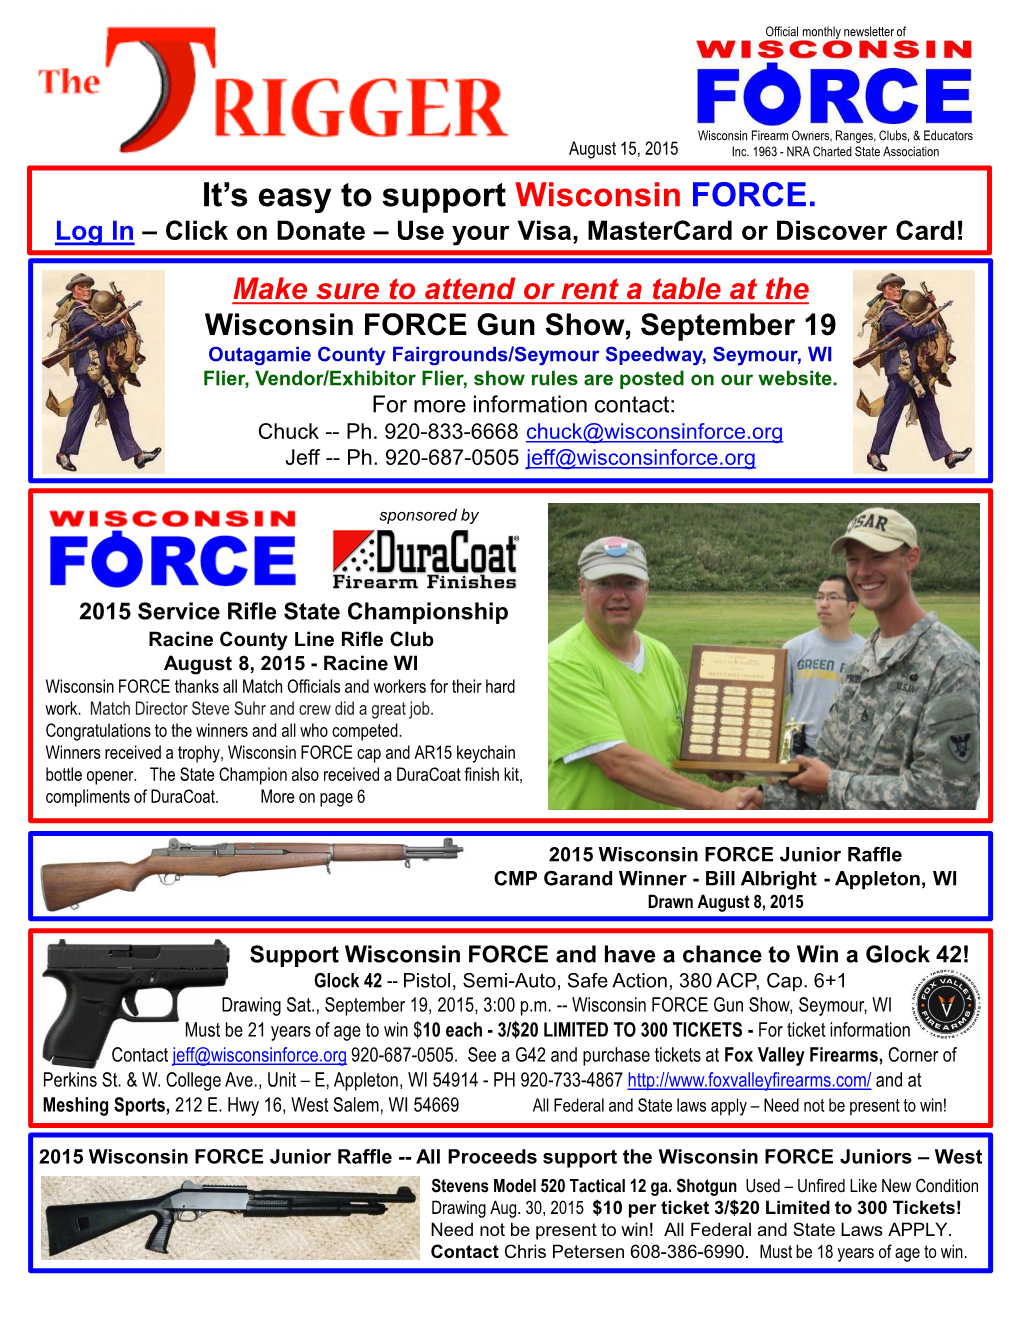 It's Easy to Support Wisconsin FORCE